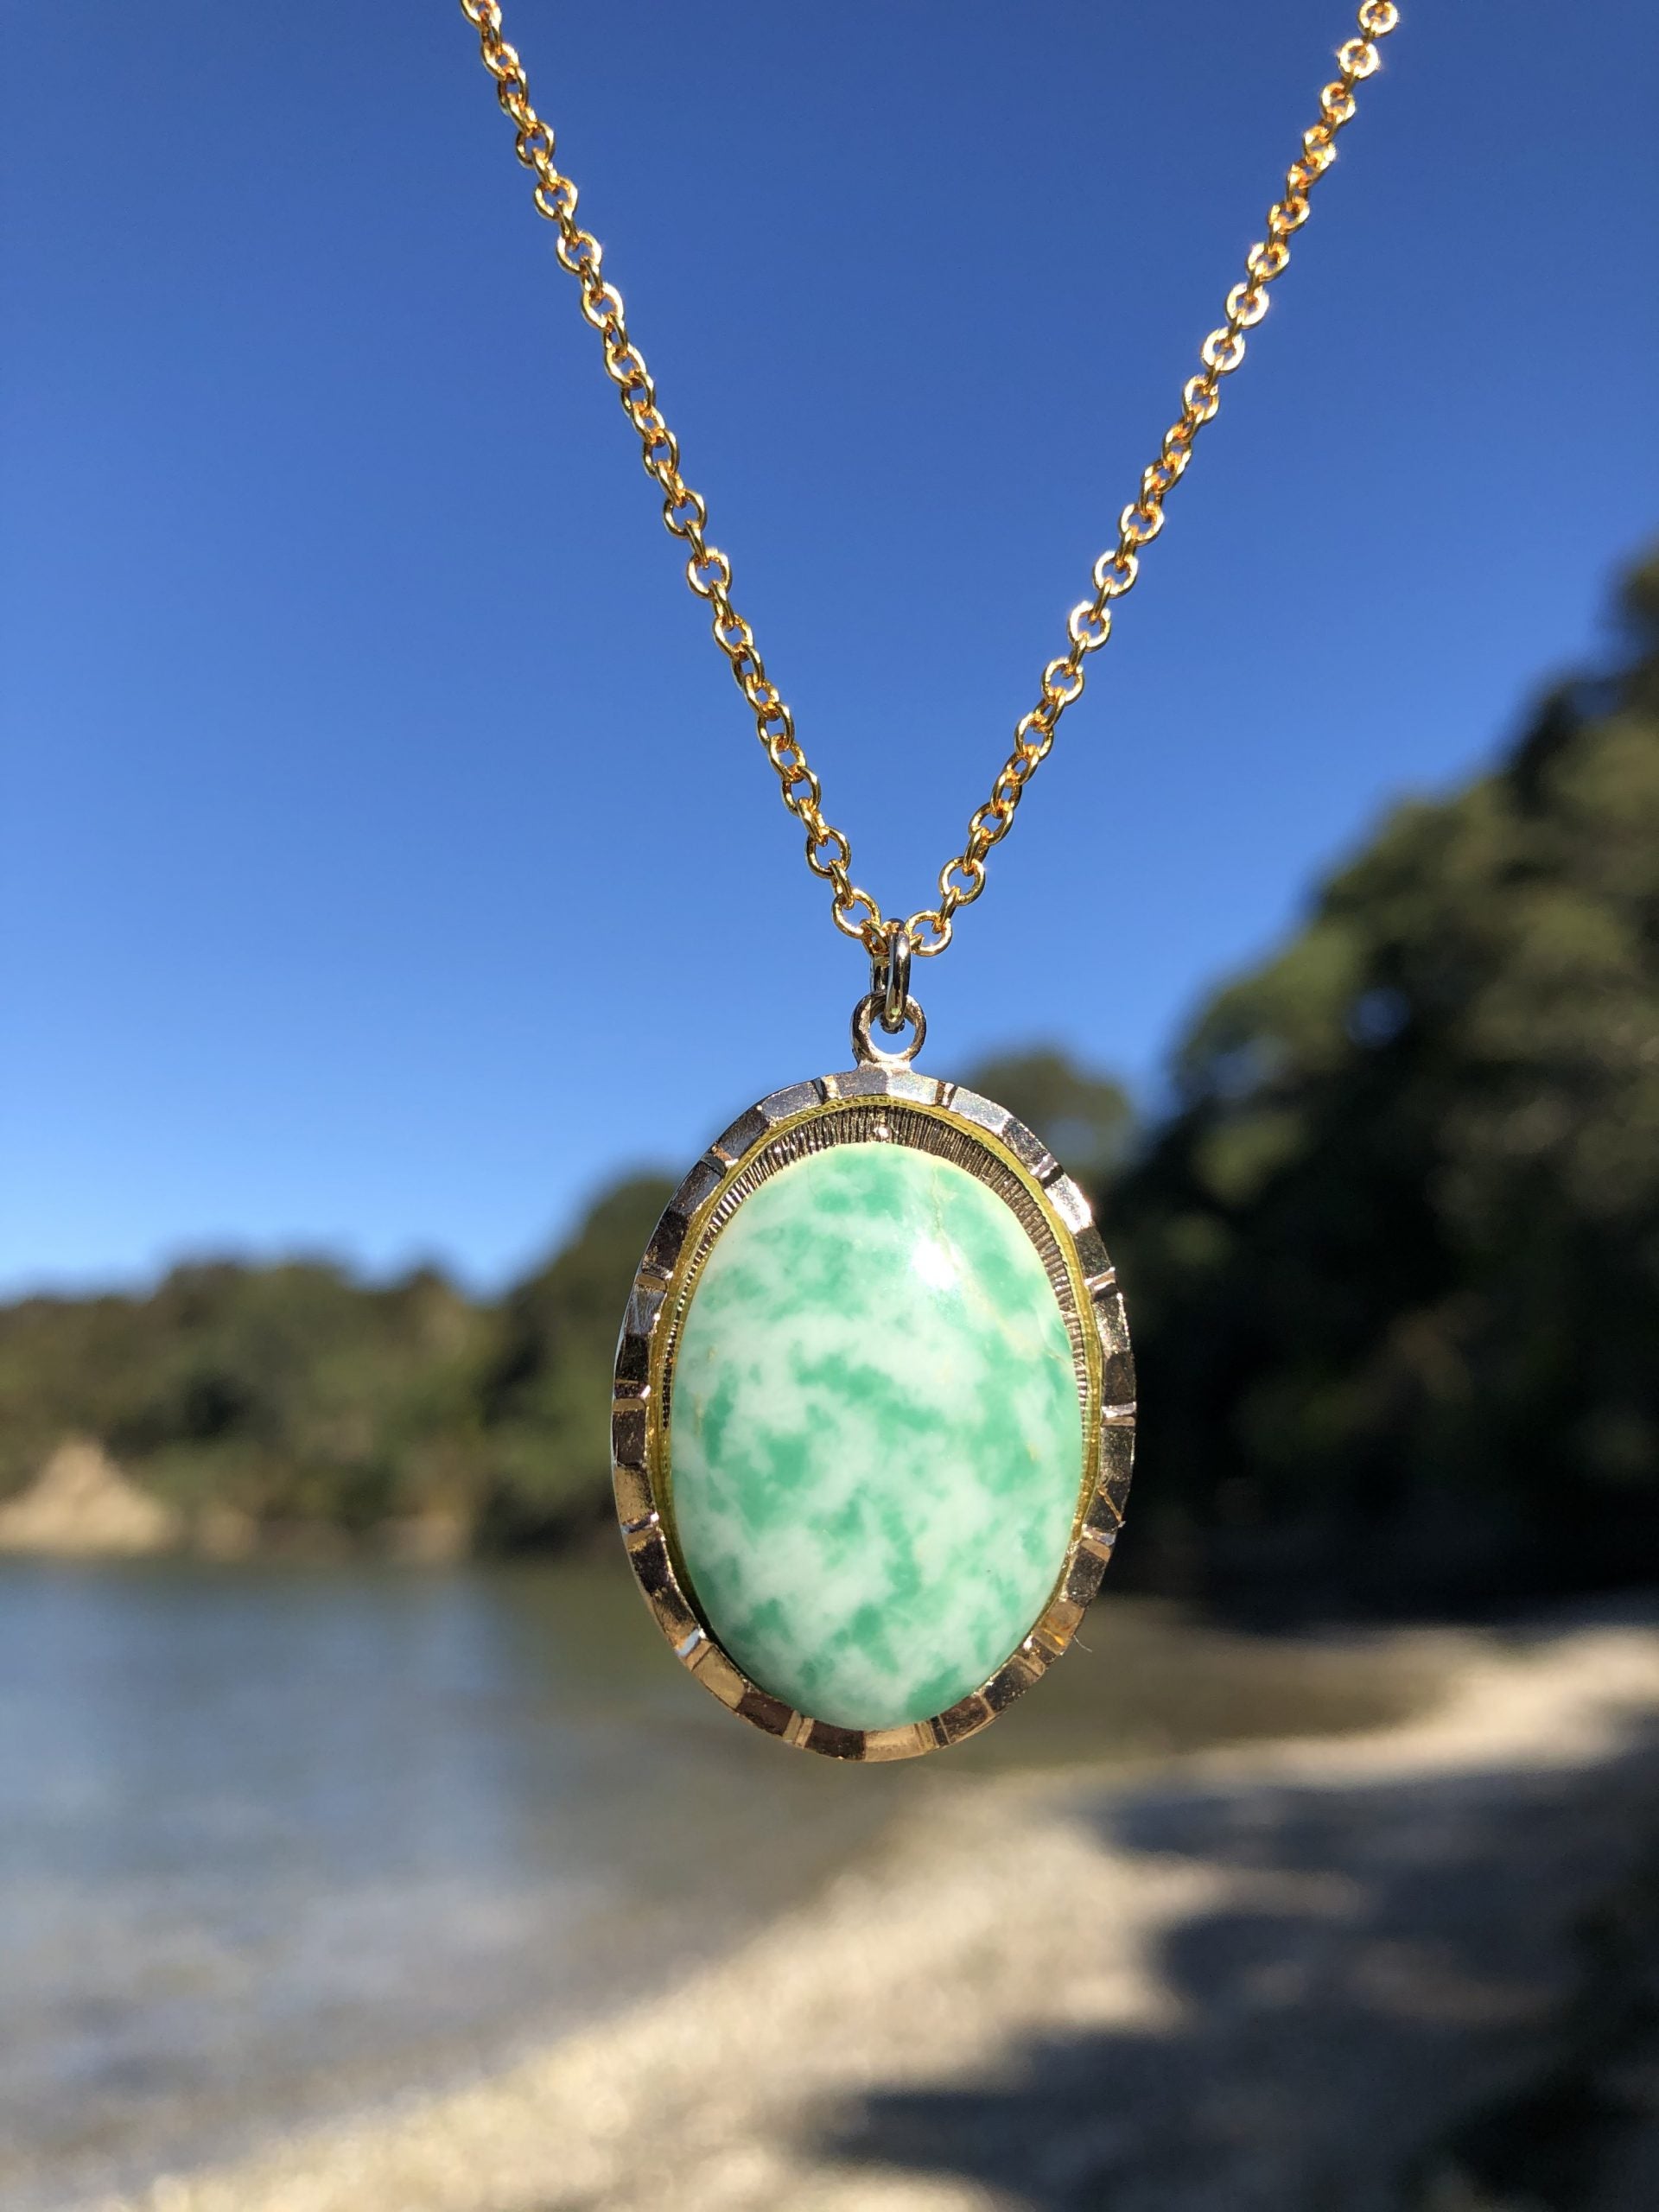 Necklace with an unusual mix of green jade in white quartz, found on a beach in California, USA and hand polished to a 25x18mm cabochon and set in a gold plated setting with 19 inch chain, on beach